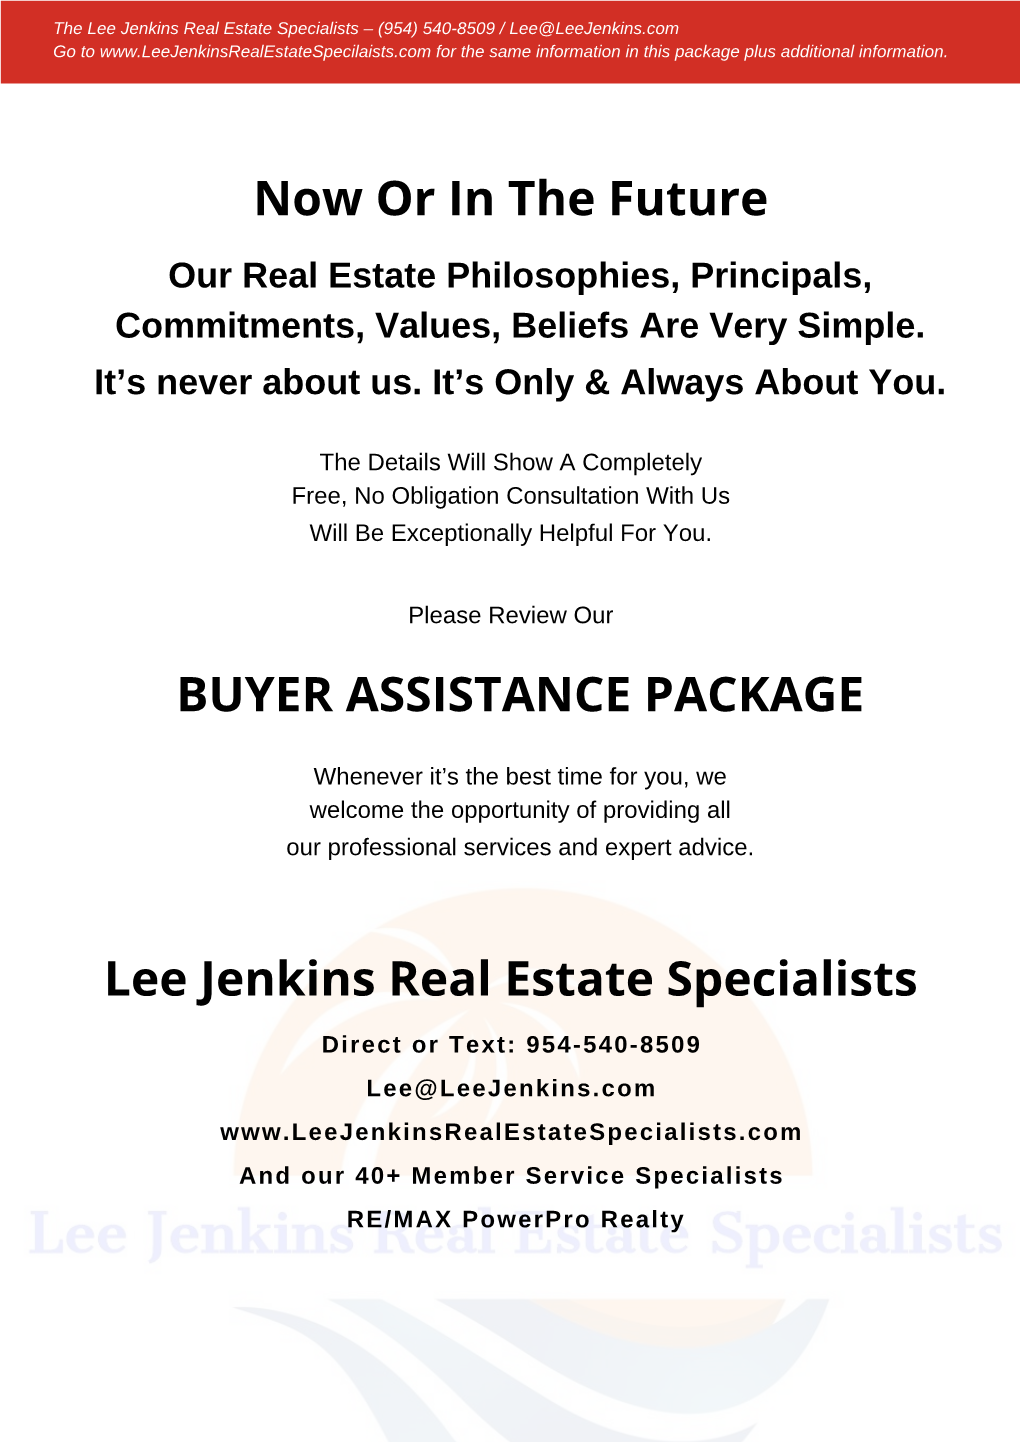 Now Or in the Future BUYER ASSISTANCE PACKAGE Lee